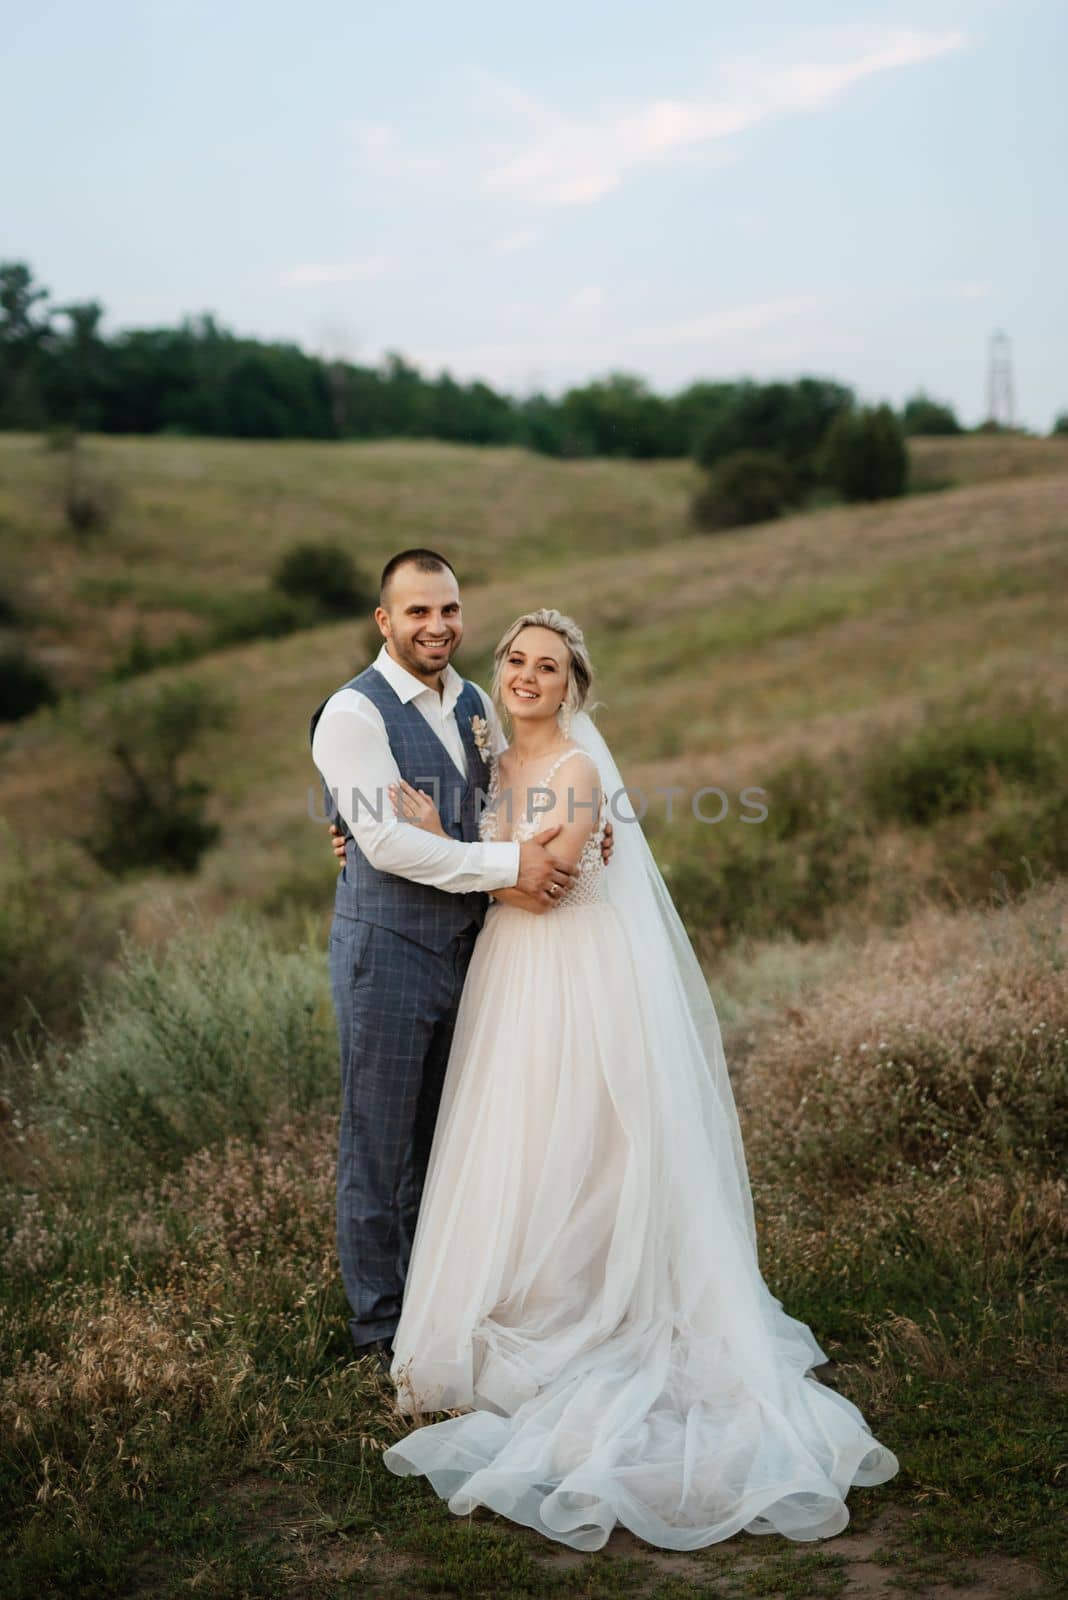 bride blonde girl and groom in a field by Andreua